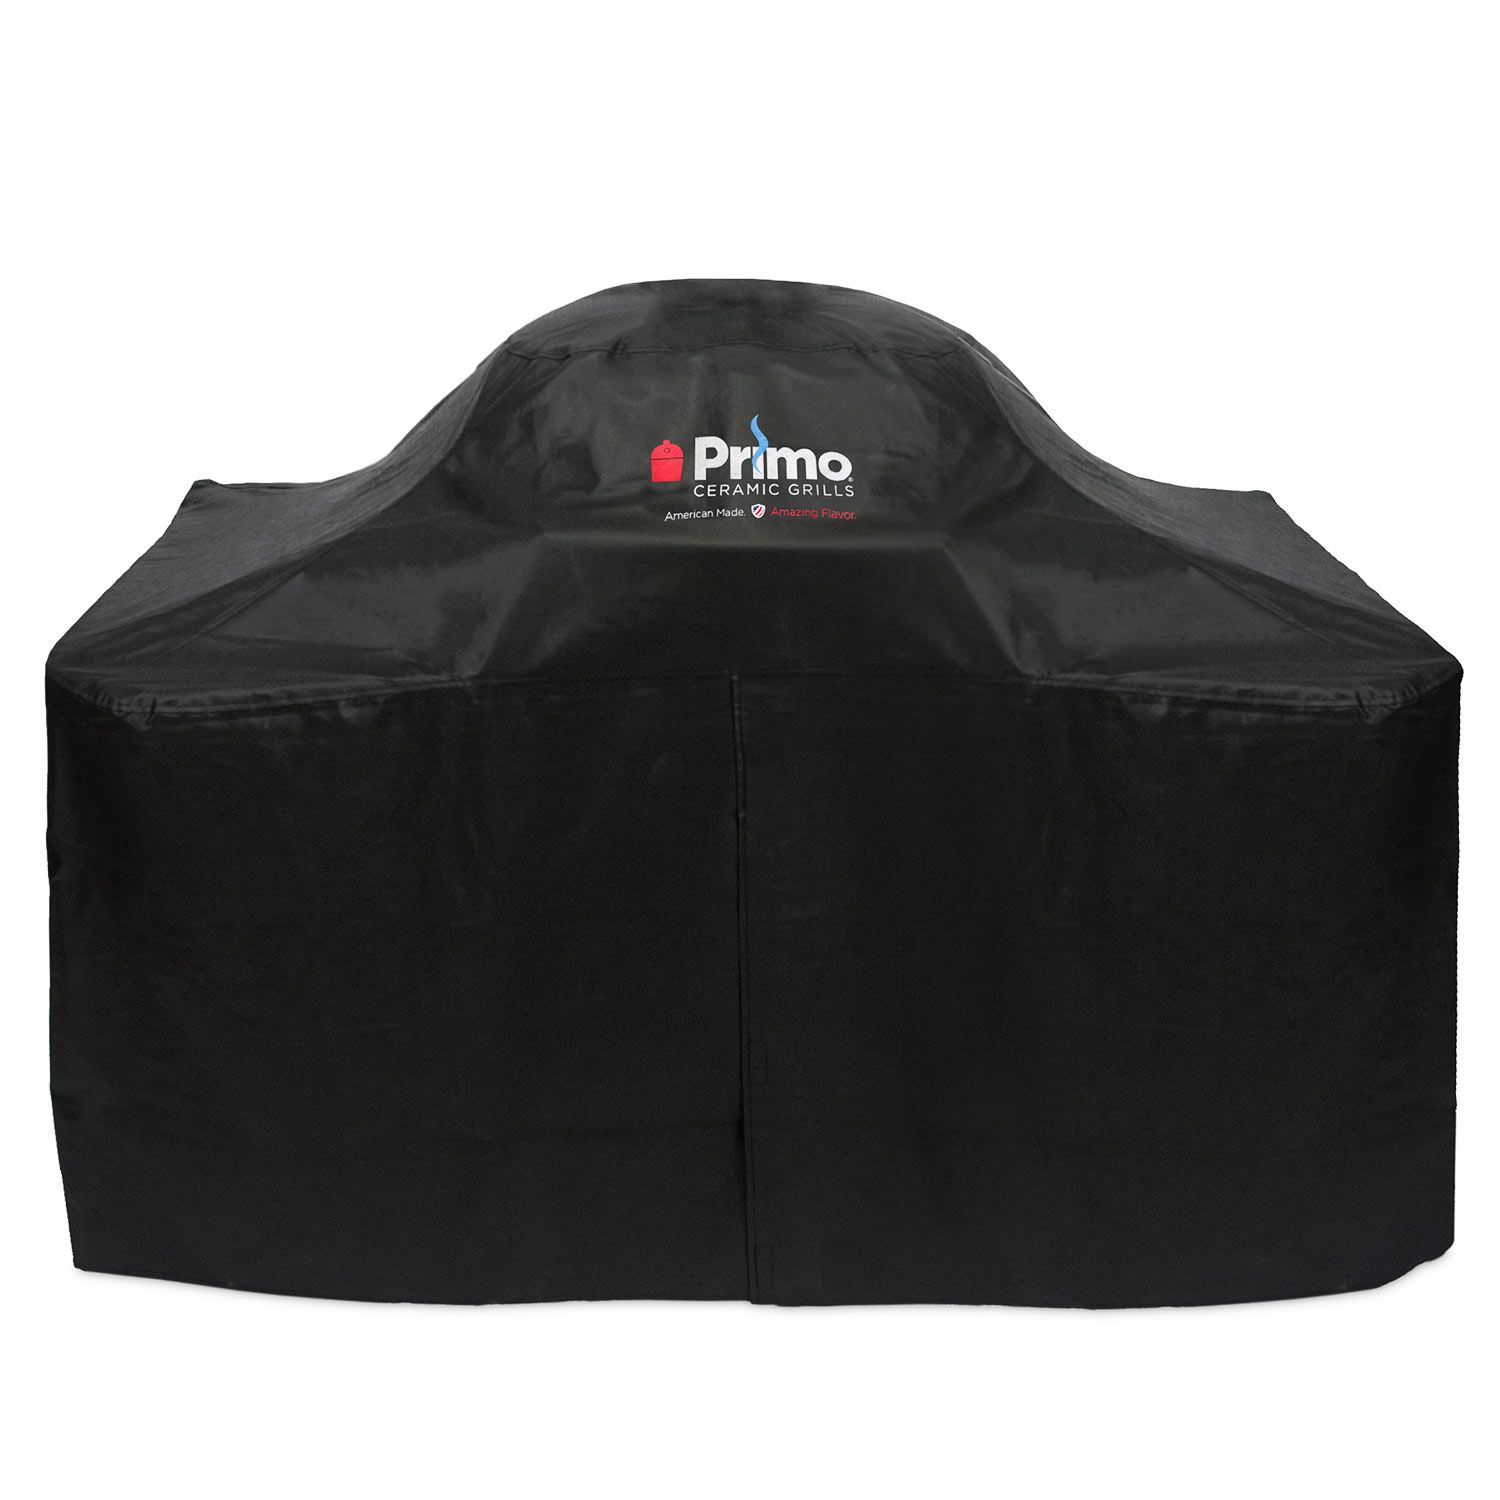 Primo G420C Gas Grill Cover